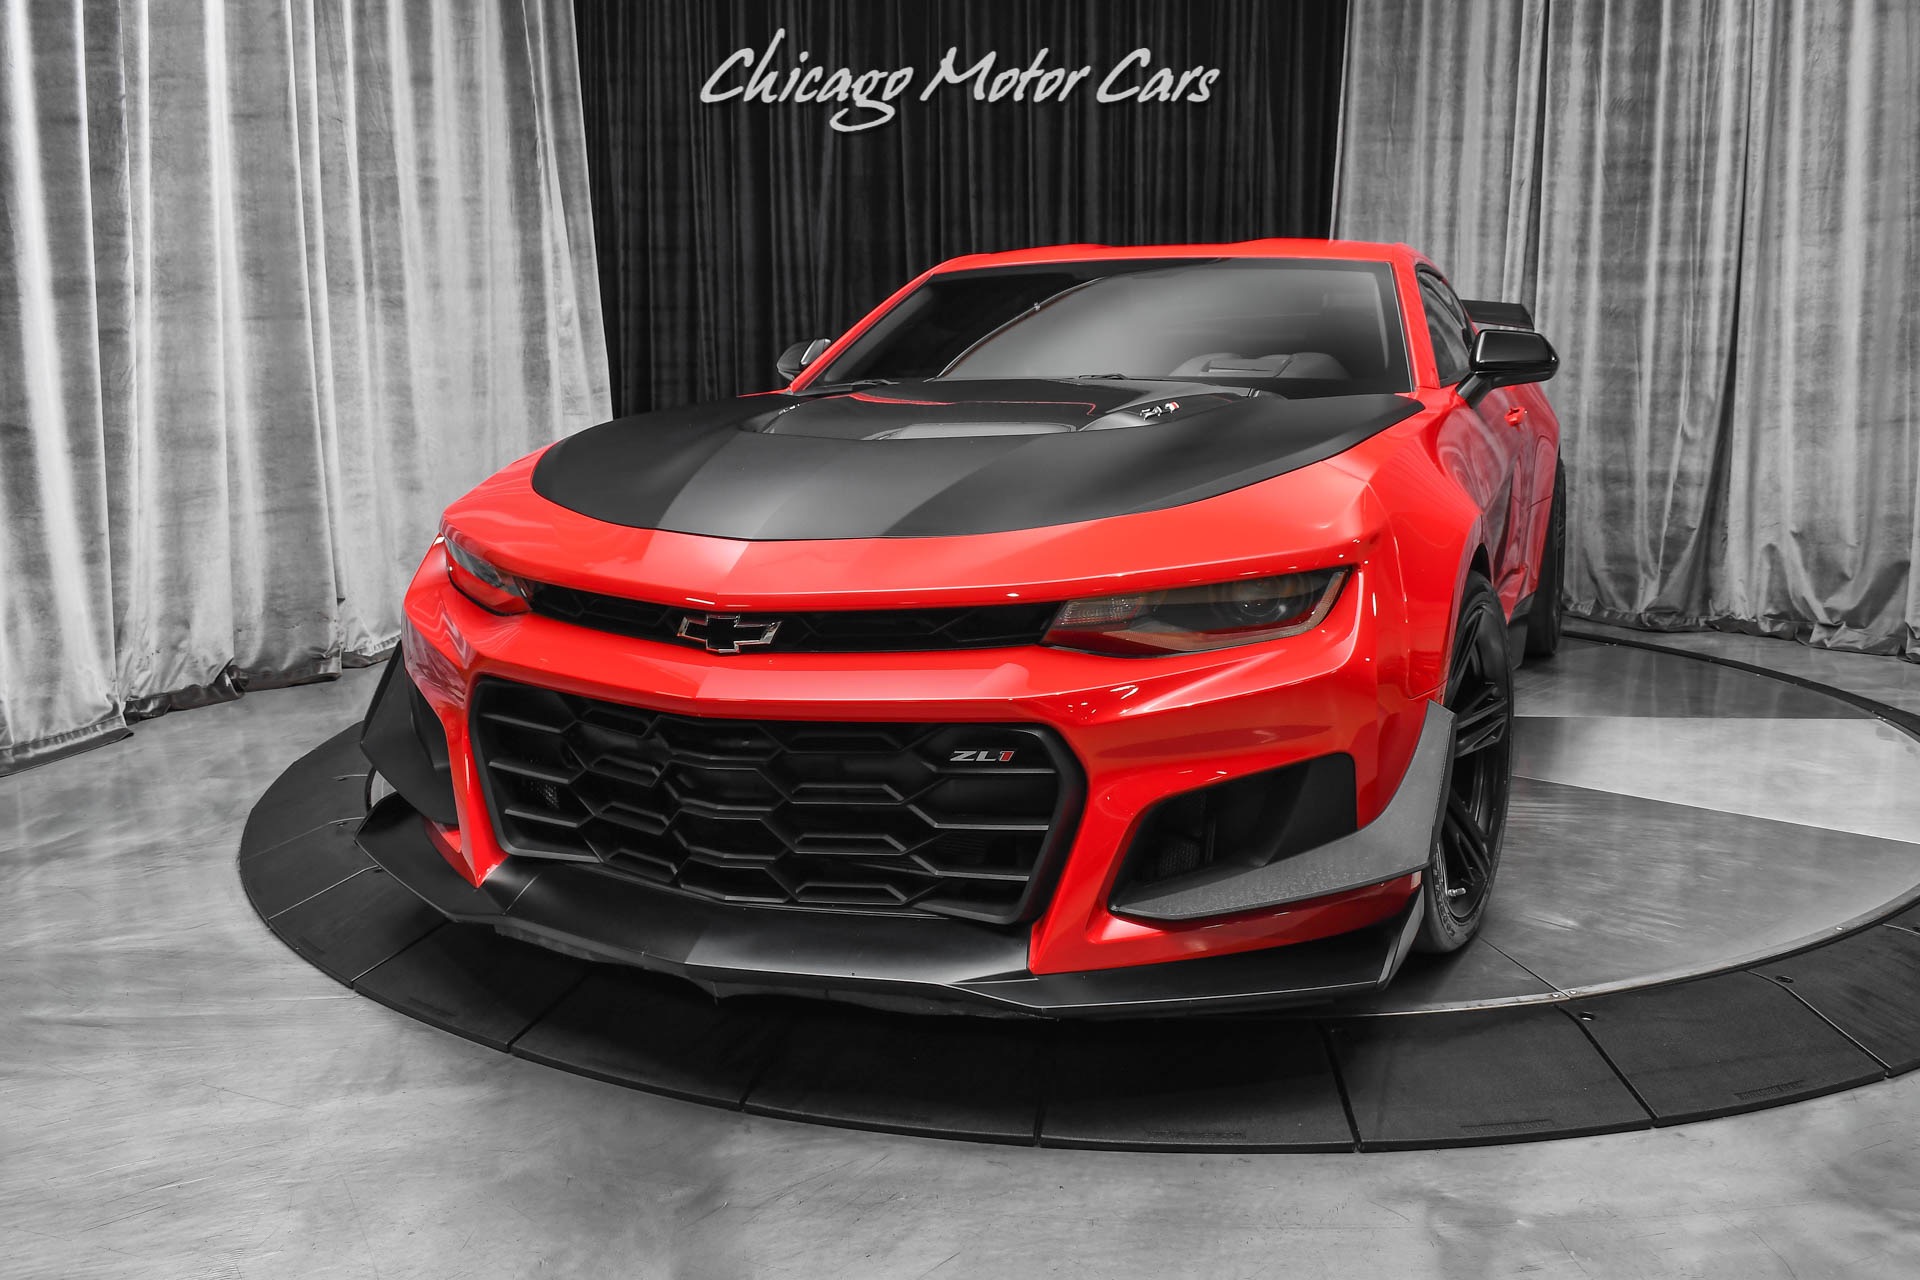 Used 2020 Chevrolet Camaro ZL1 1LE TRACK PACK! 10-SPEED AUTO! ONLY 7K  MILES! For Sale (Special Pricing) | Chicago Motor Cars Stock #18540B